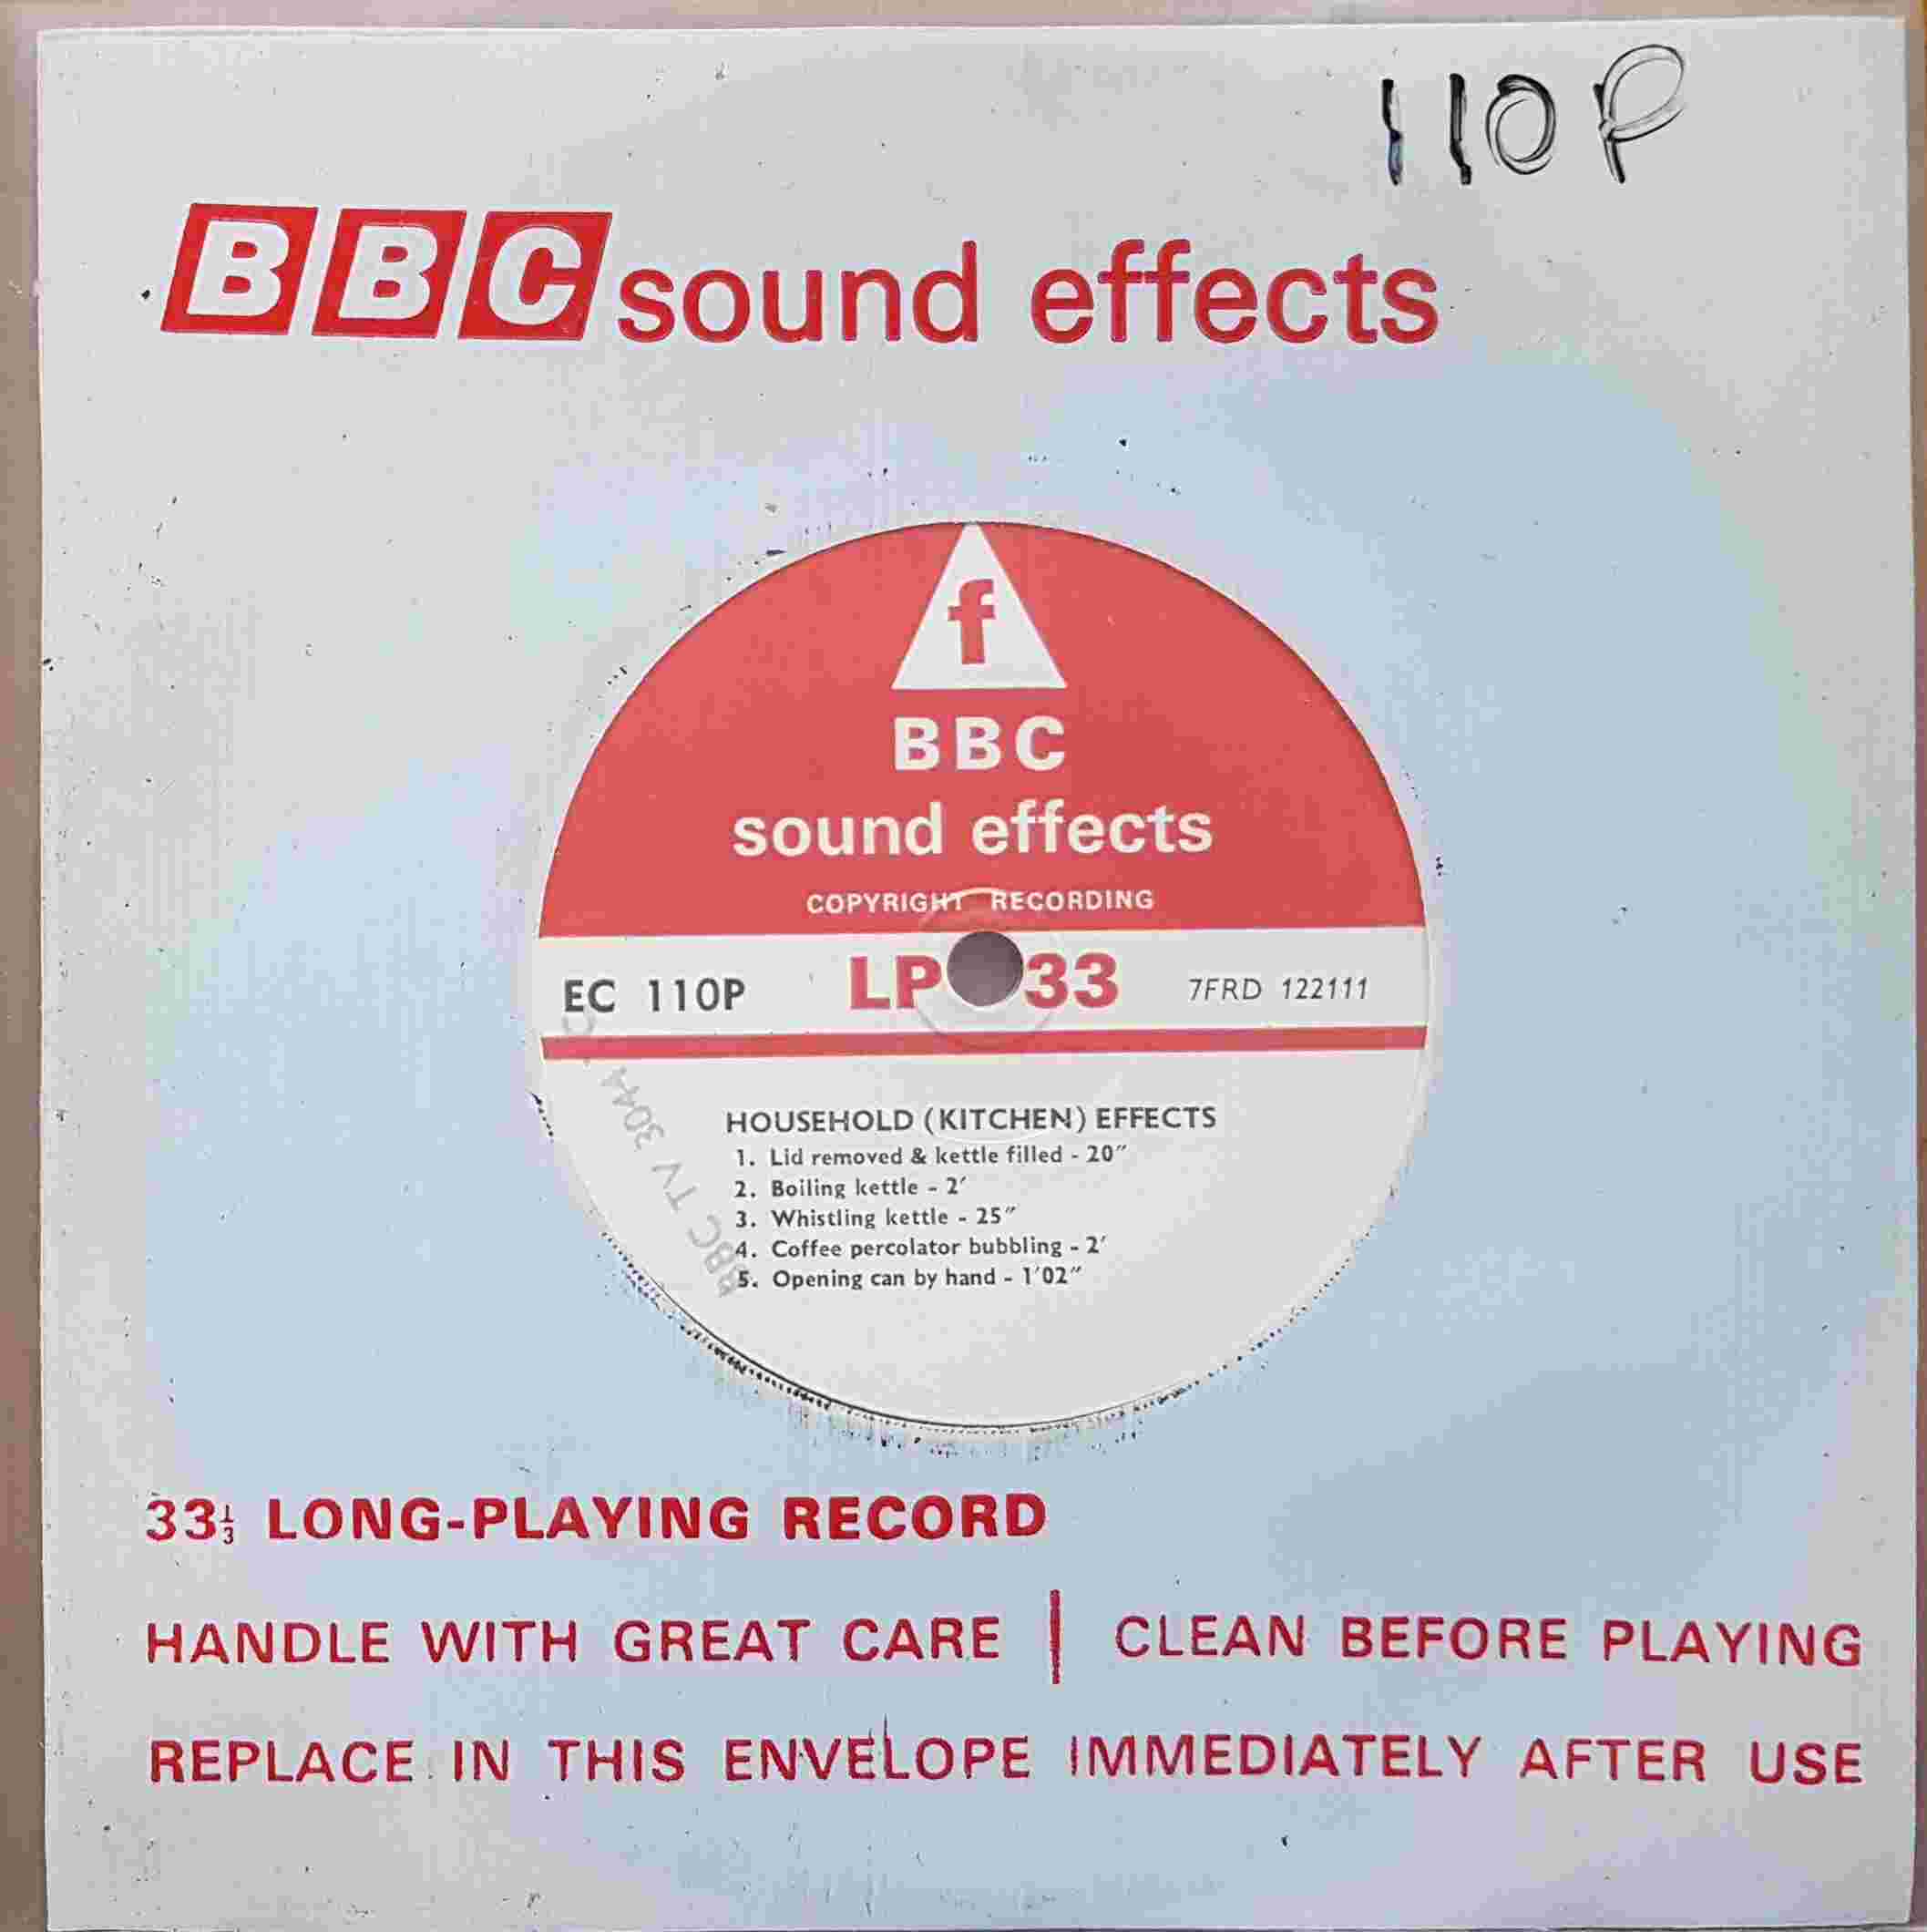 Picture of EC 110P Household (Kitchen) effects by artist Not registered from the BBC records and Tapes library